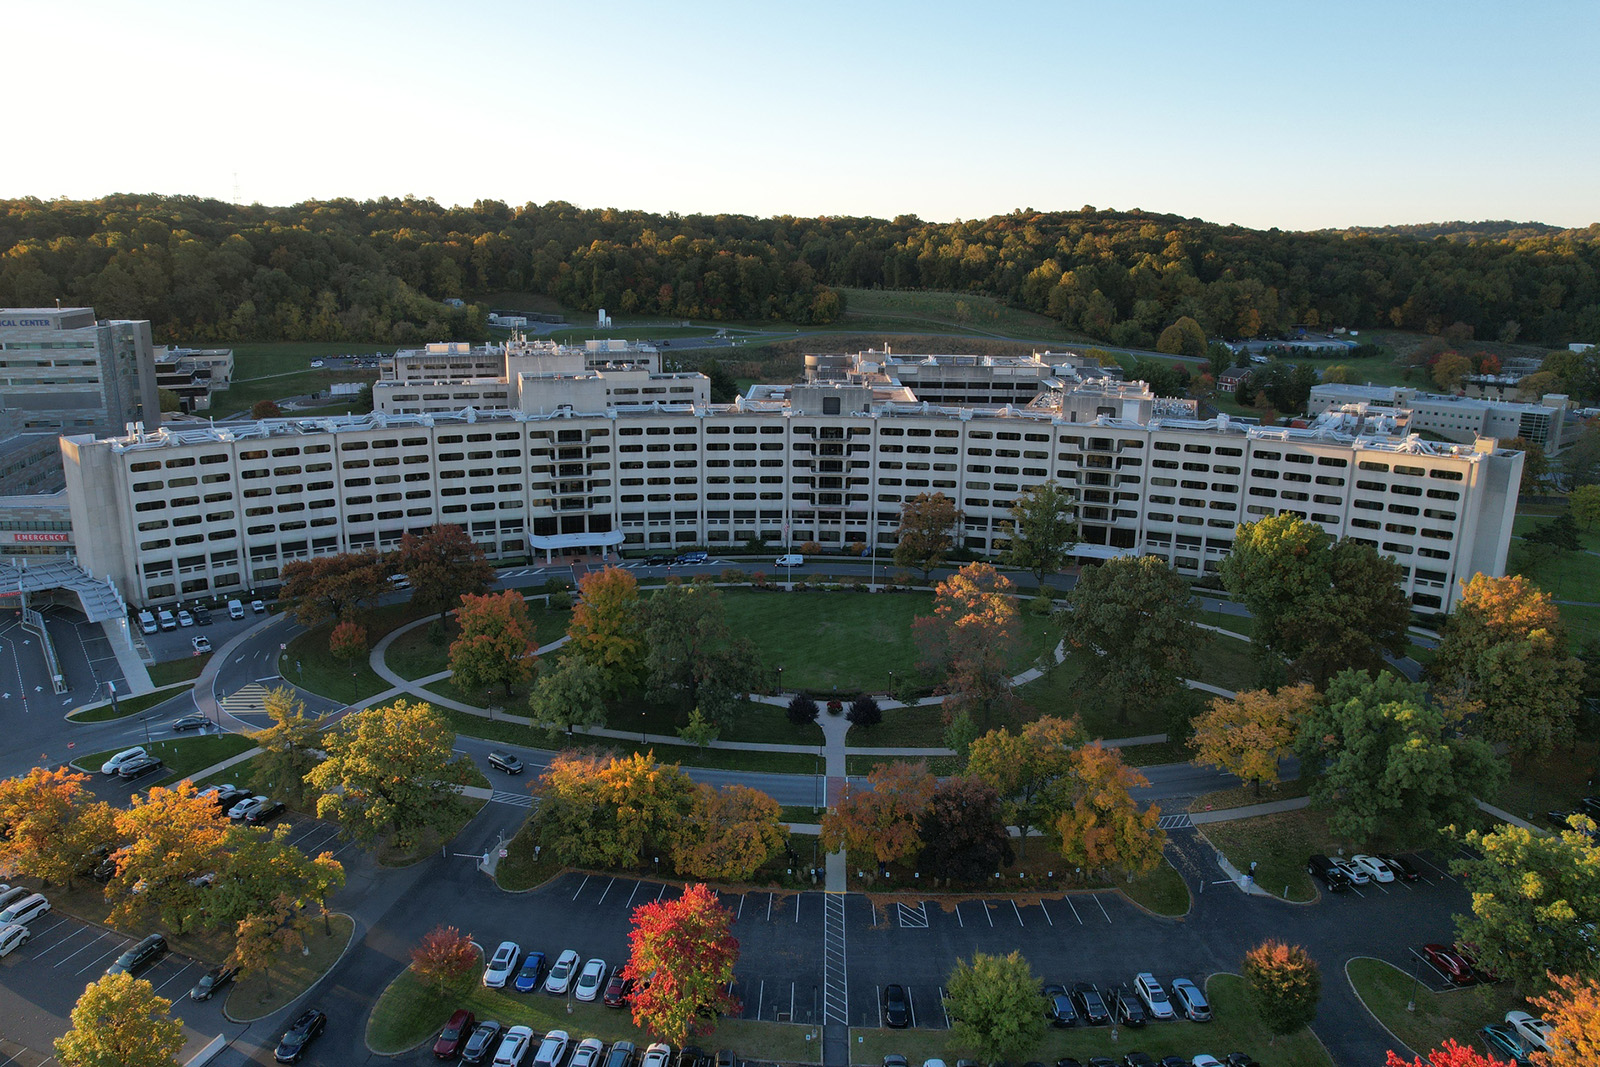 Penn State College of Medicine crescent building shown from above in an image taken by drone